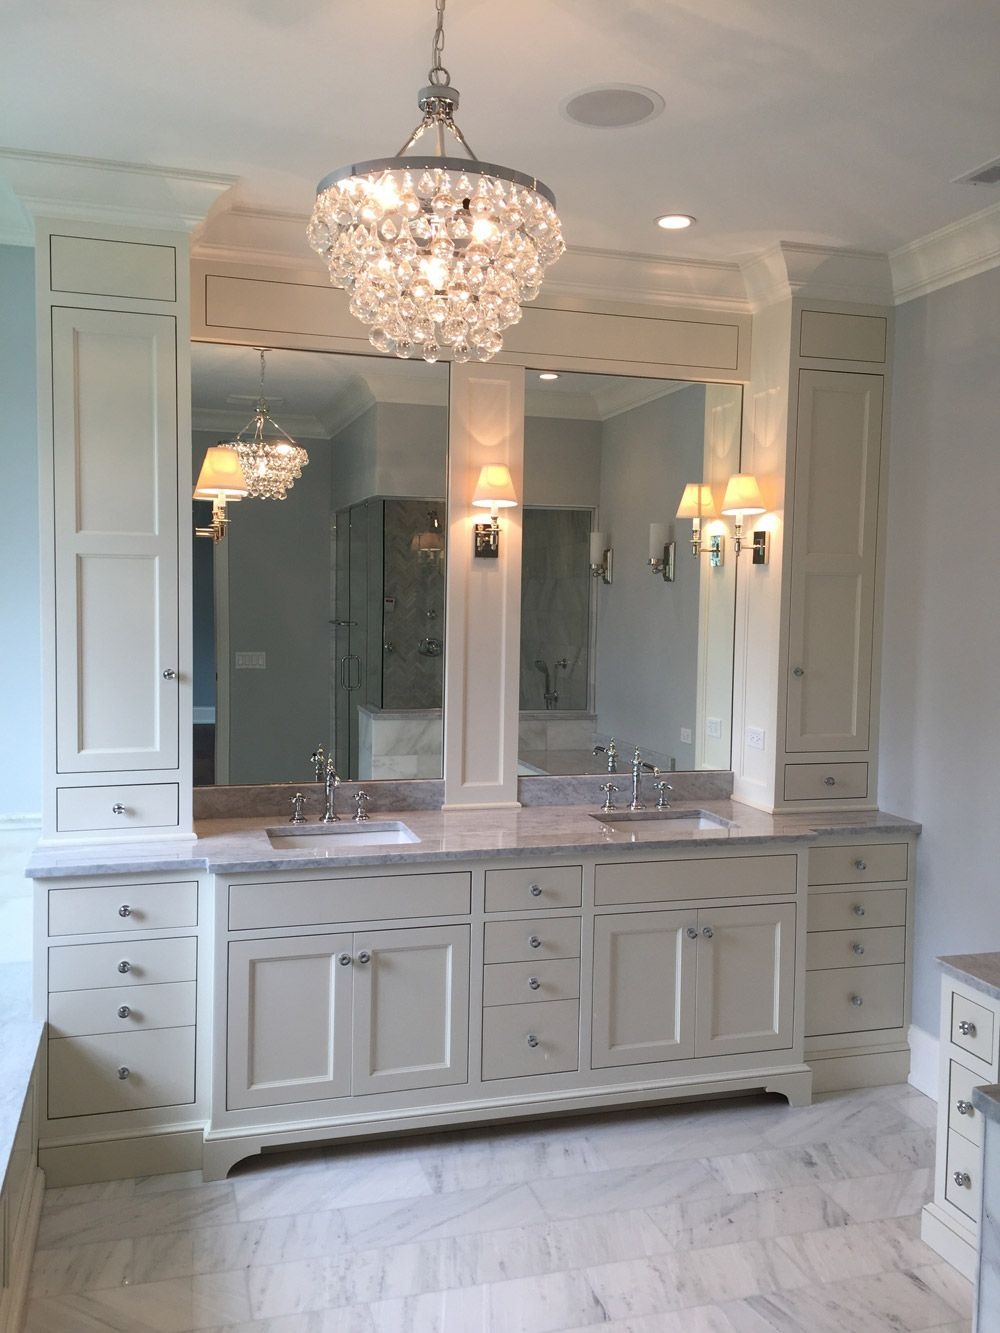 Luxurious White Bathroom With A Chandelier